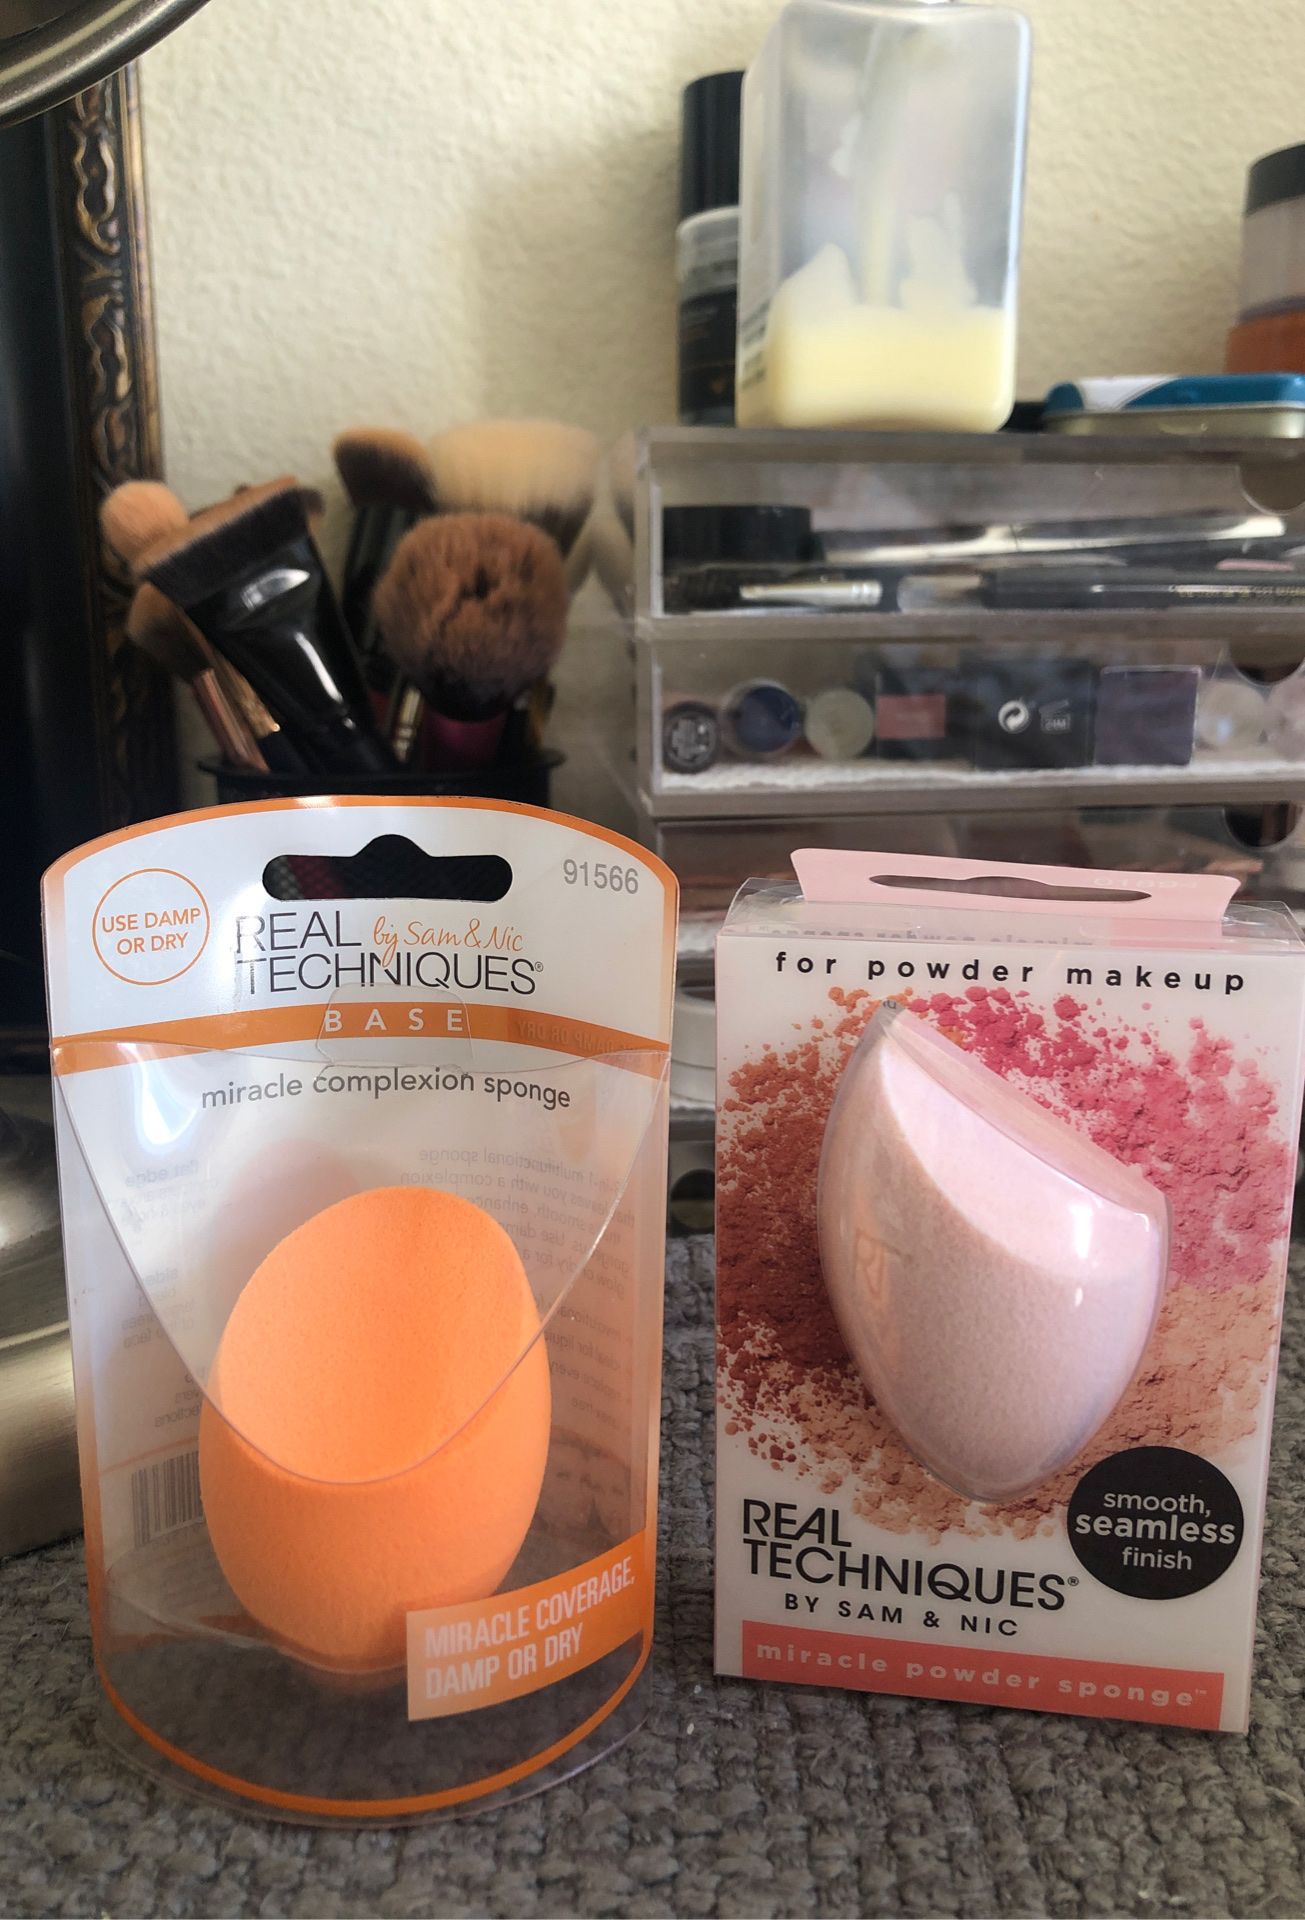 Real techniques beauty blender miracle complexion sponge and miracle powder sponge